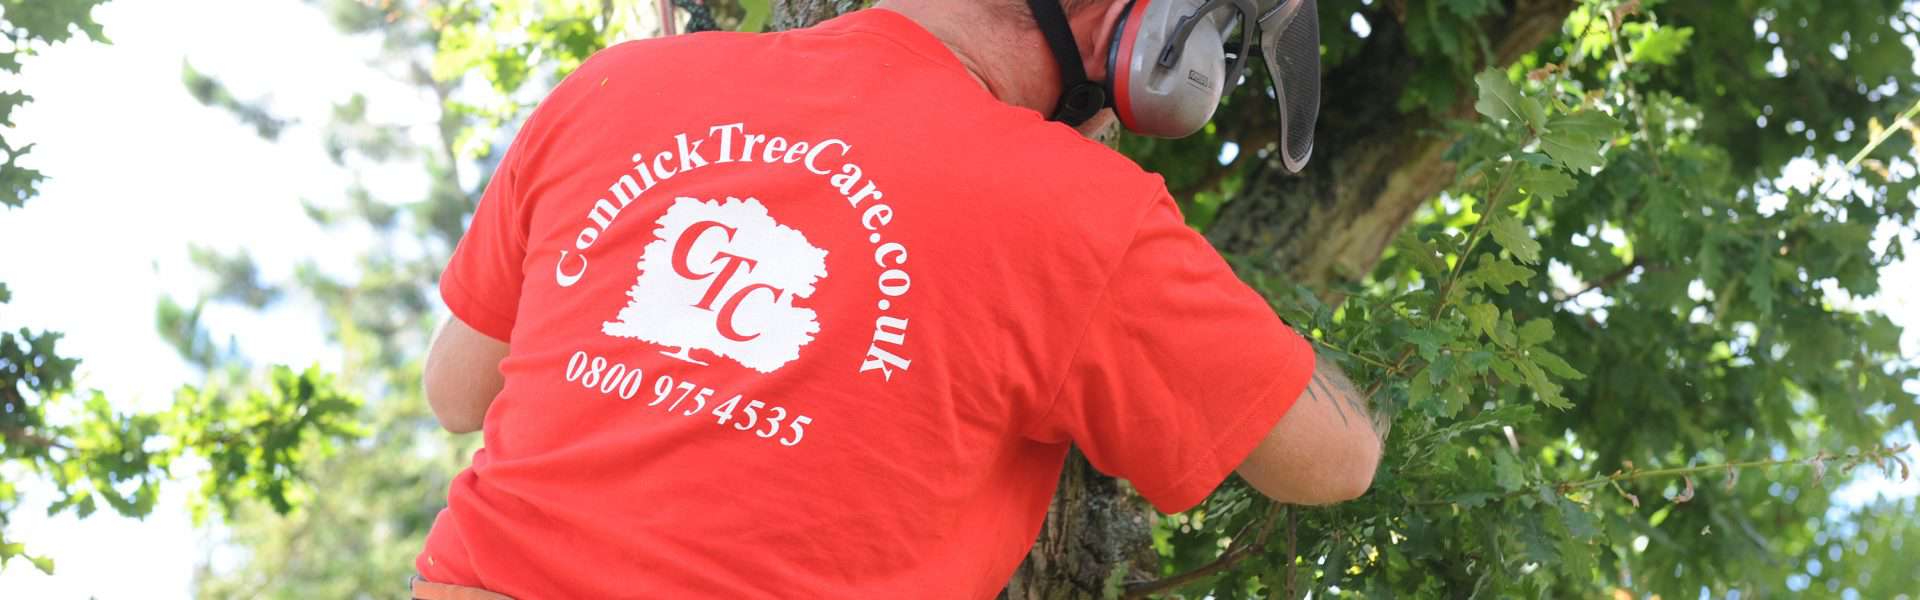 A member of the Connick Tree Care team working in a tree